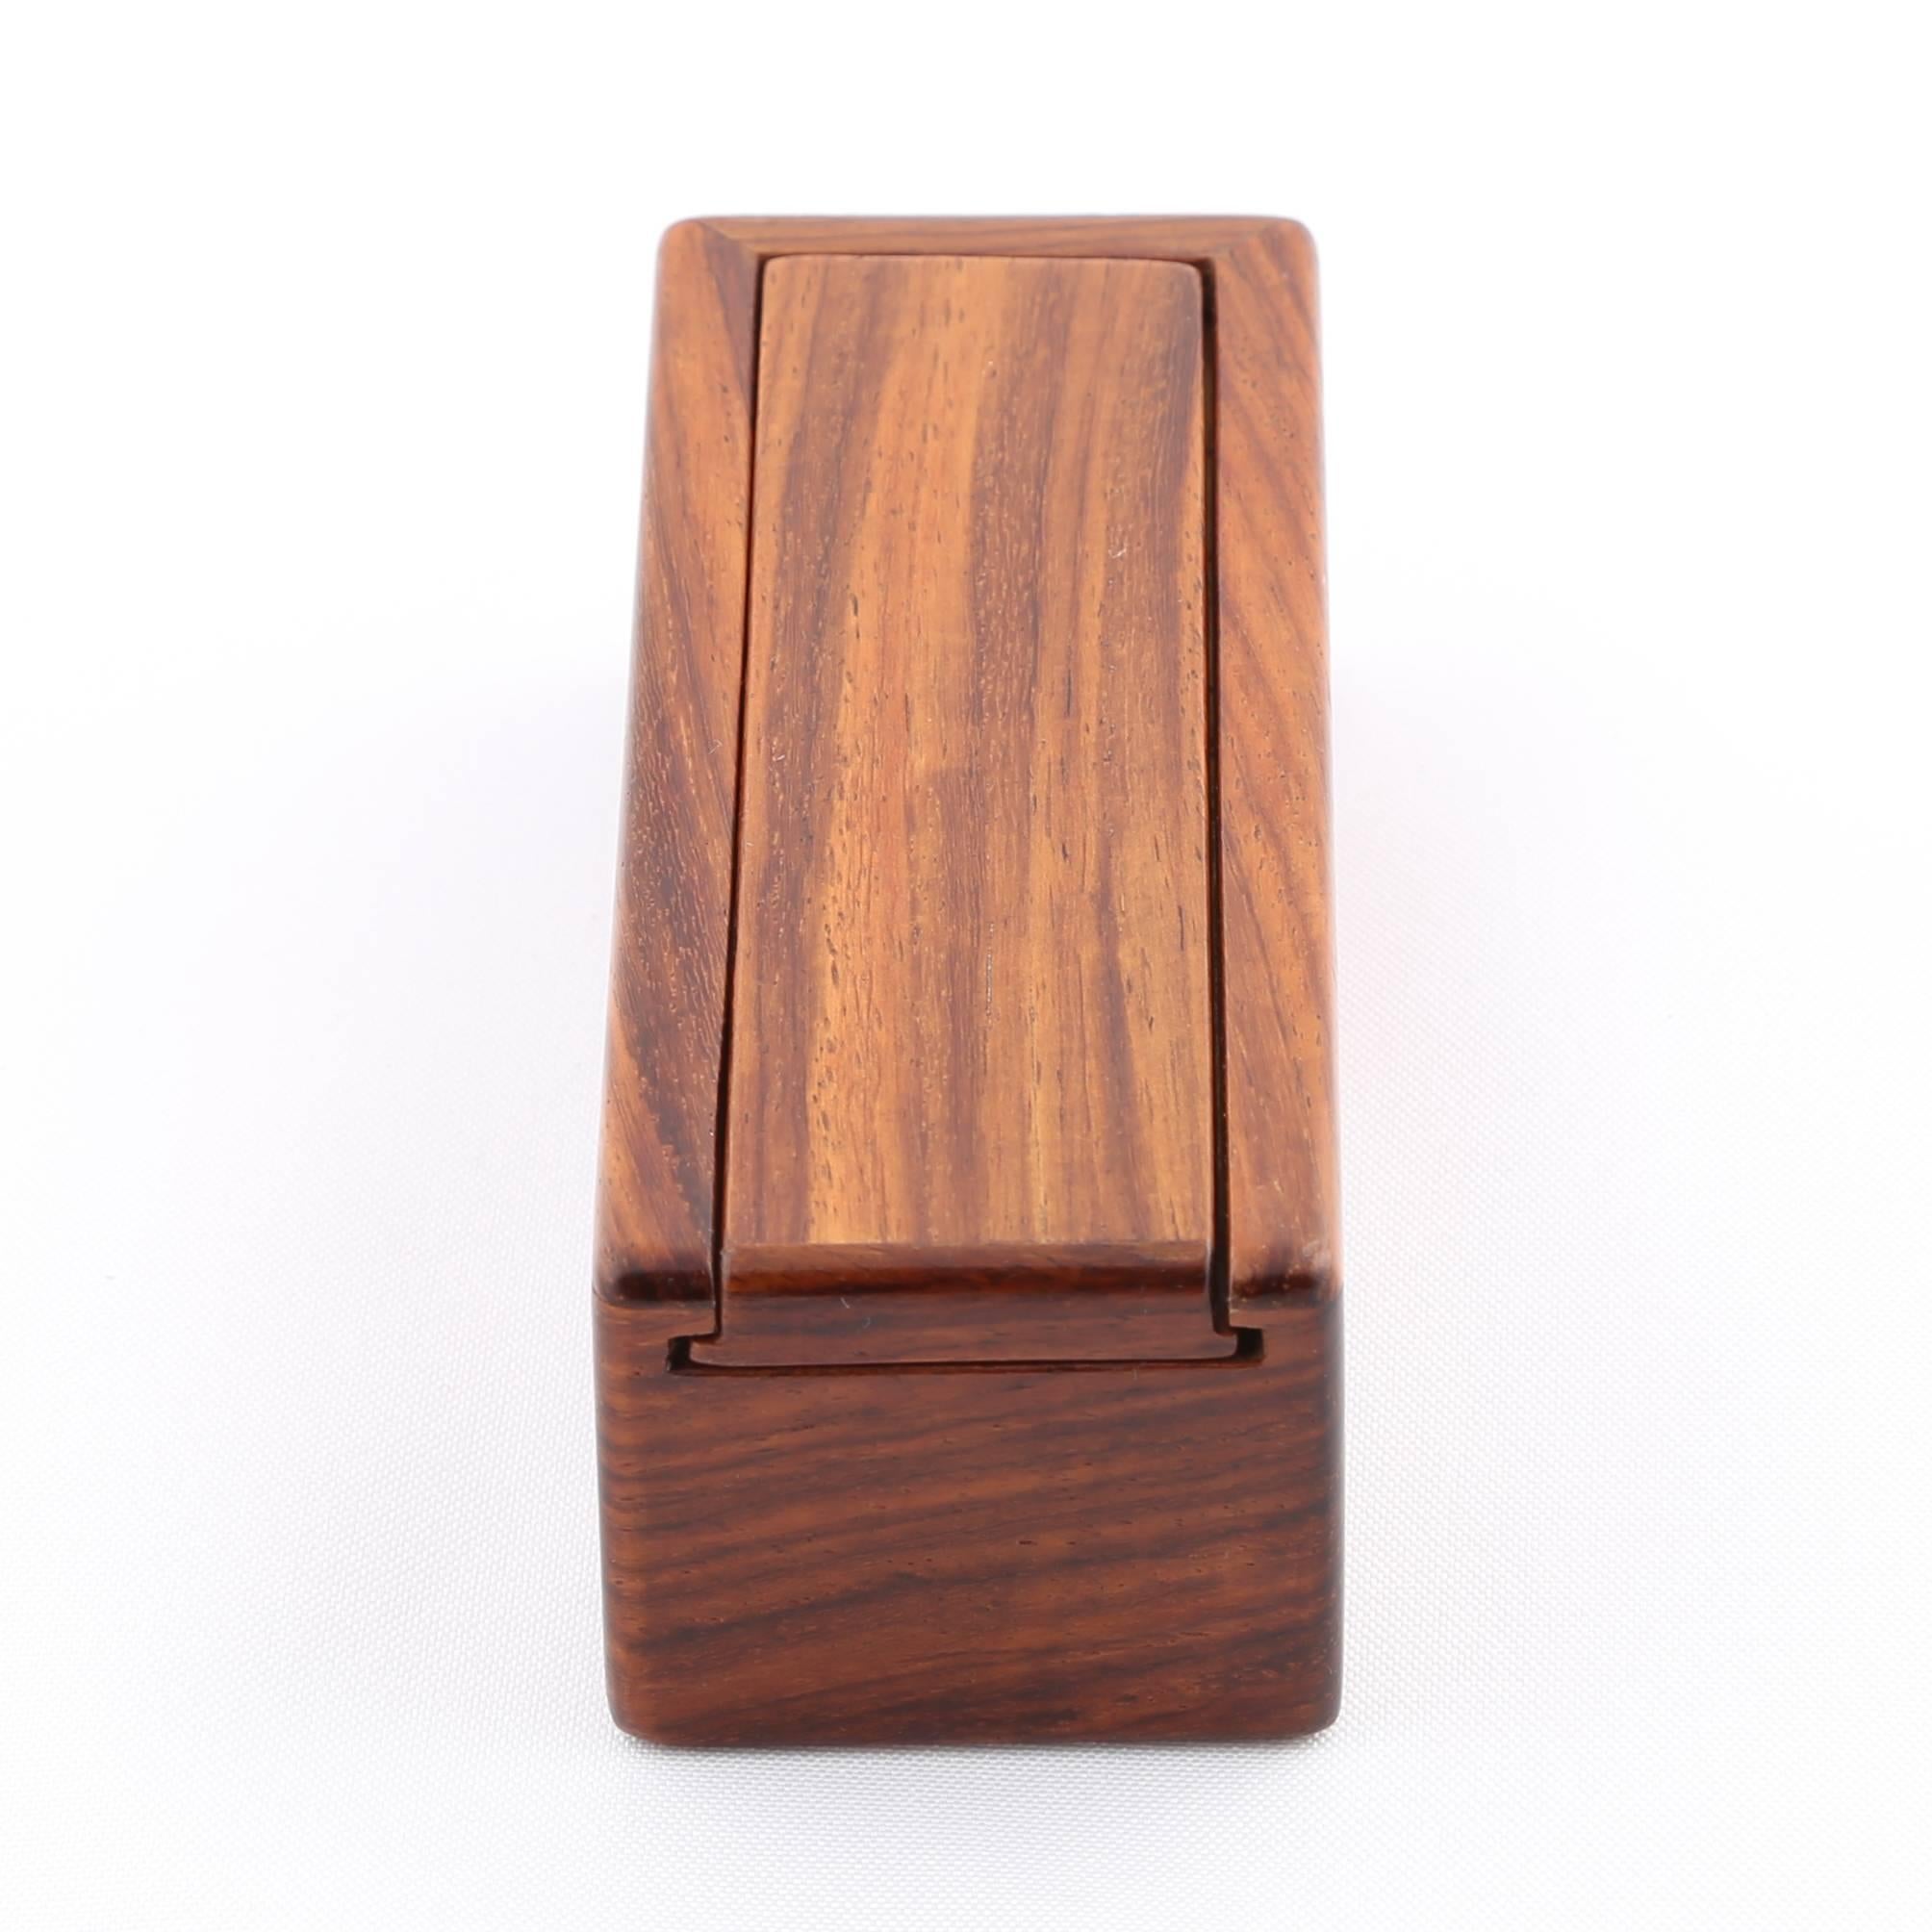 Lovely rectangular wooden box with sliding lid. Jerry Madrigale worked for Knoll's Design and Development division for many years and was in charge of prototyping anything made of wood or with wooden elements. We're offering four of Madrigale's